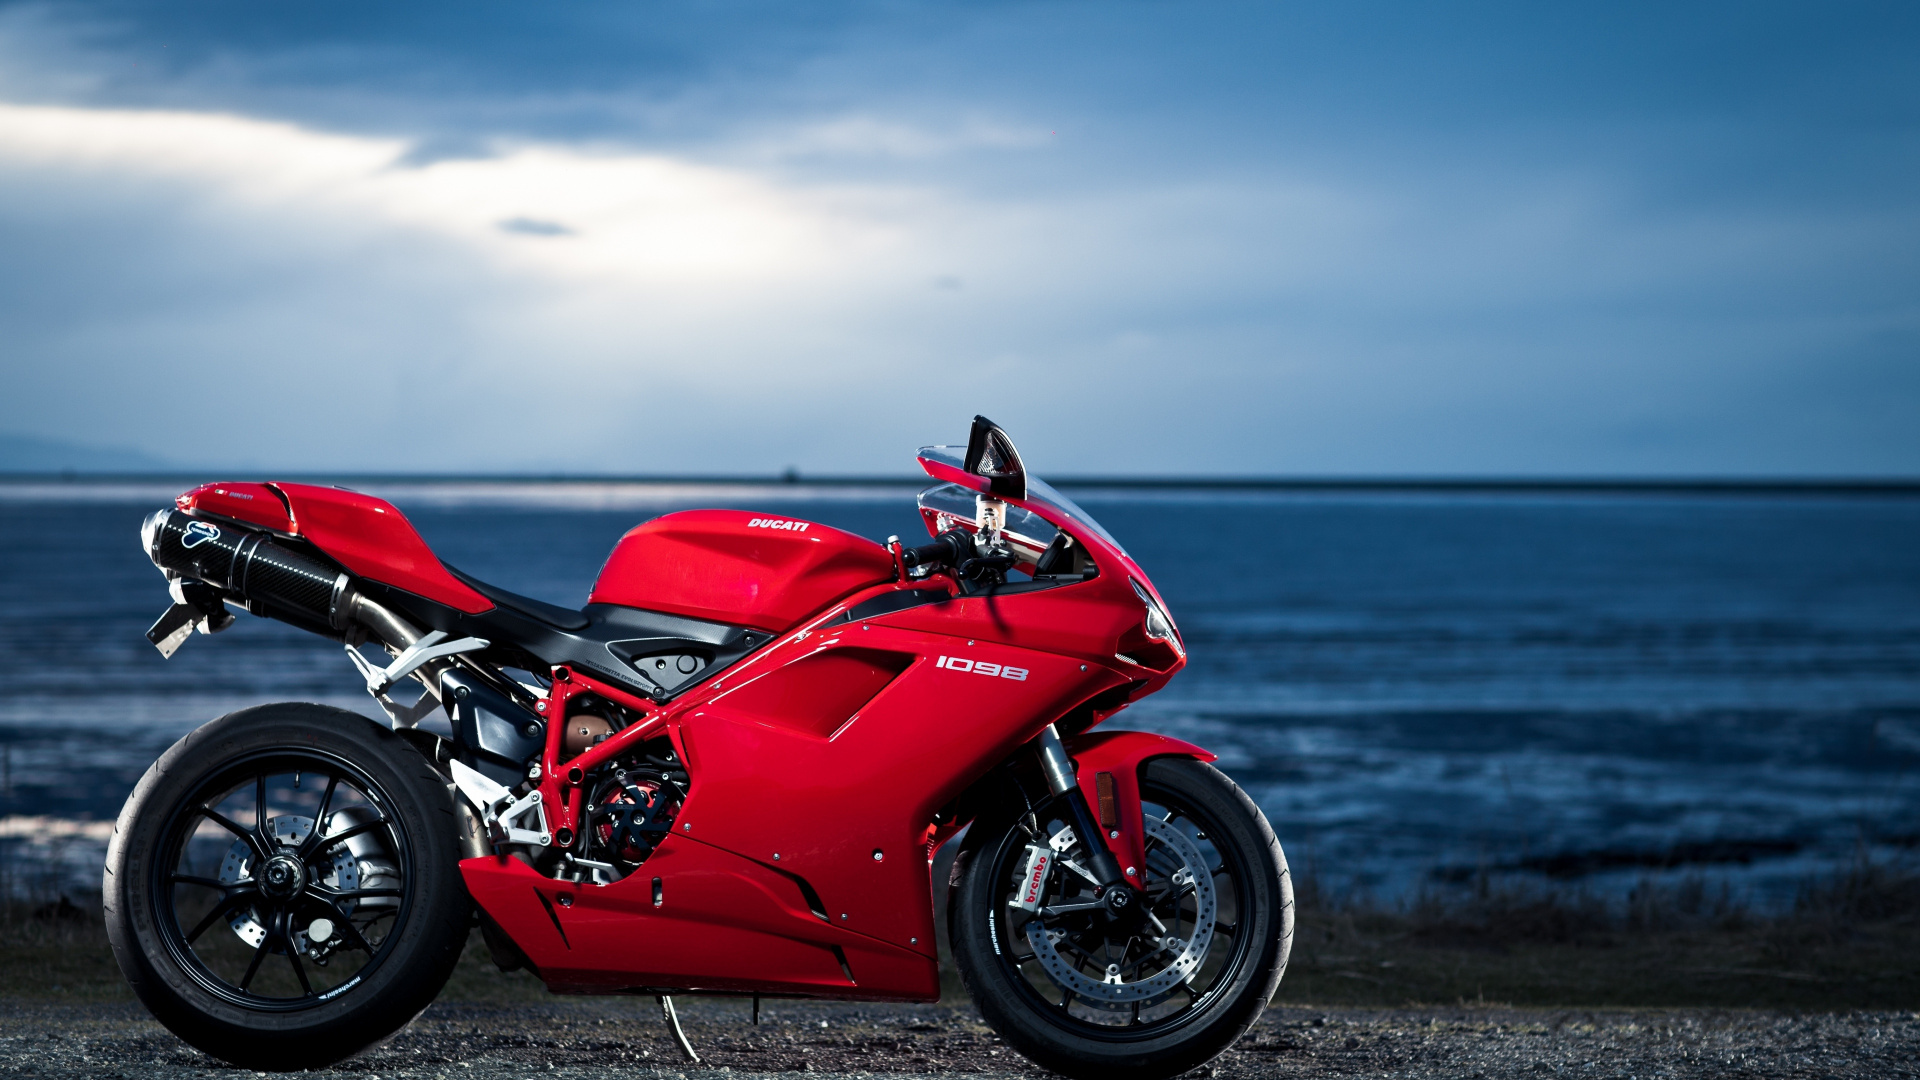 Red and Black Sports Bike Parked on Seashore During Daytime. Wallpaper in 1920x1080 Resolution